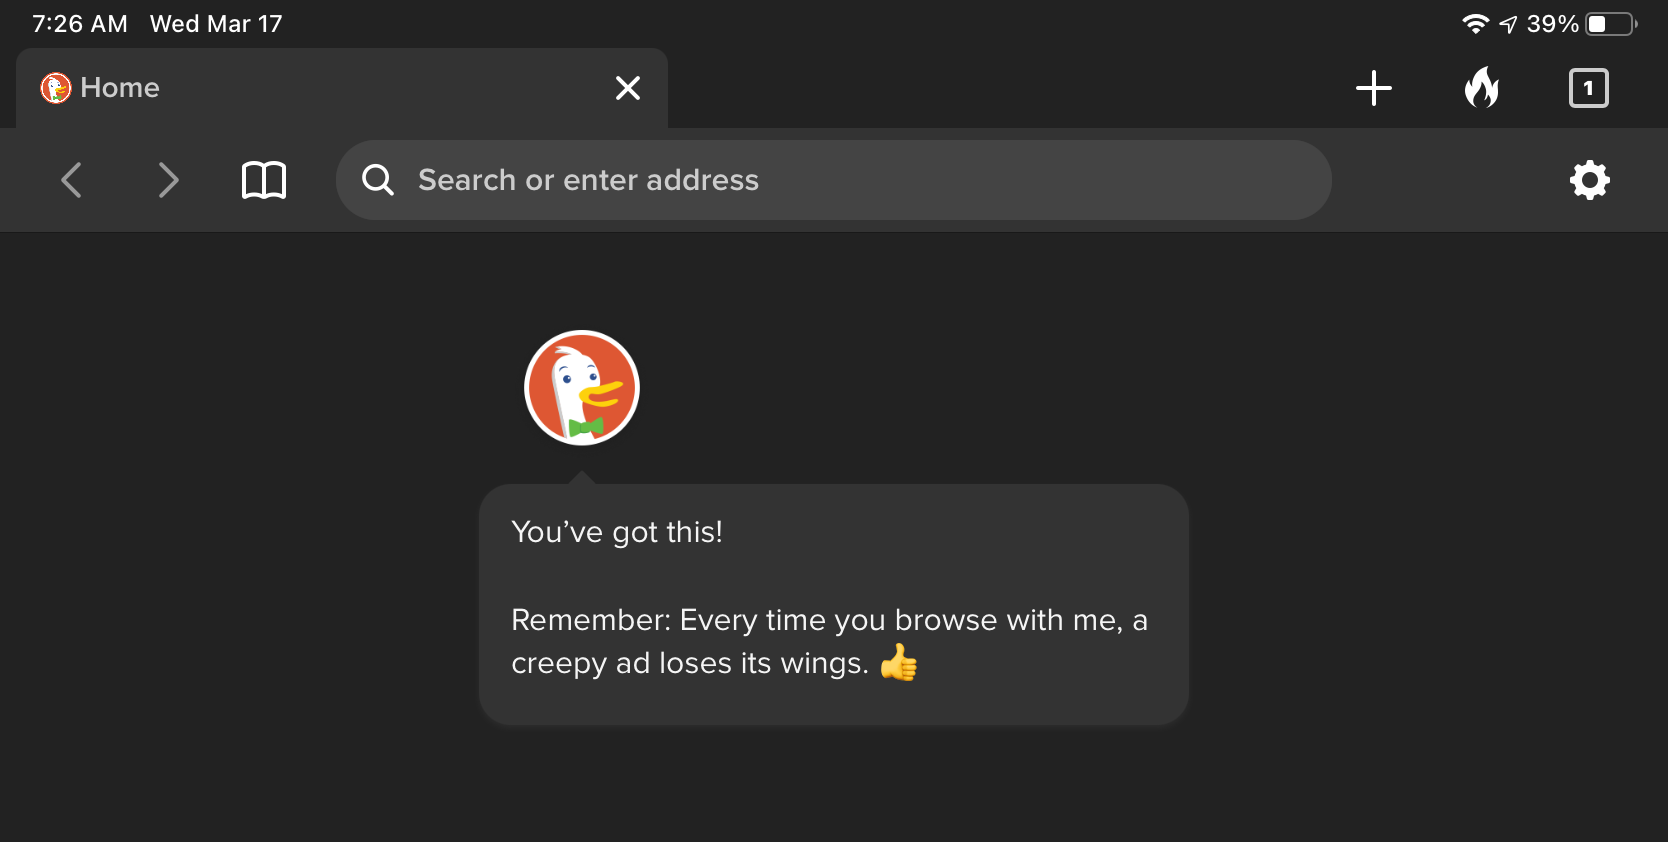 I’m trying new browsers that are stricter with user privacy and I thought this image from the on boarding process for DuckDuckGo was pretty funny.